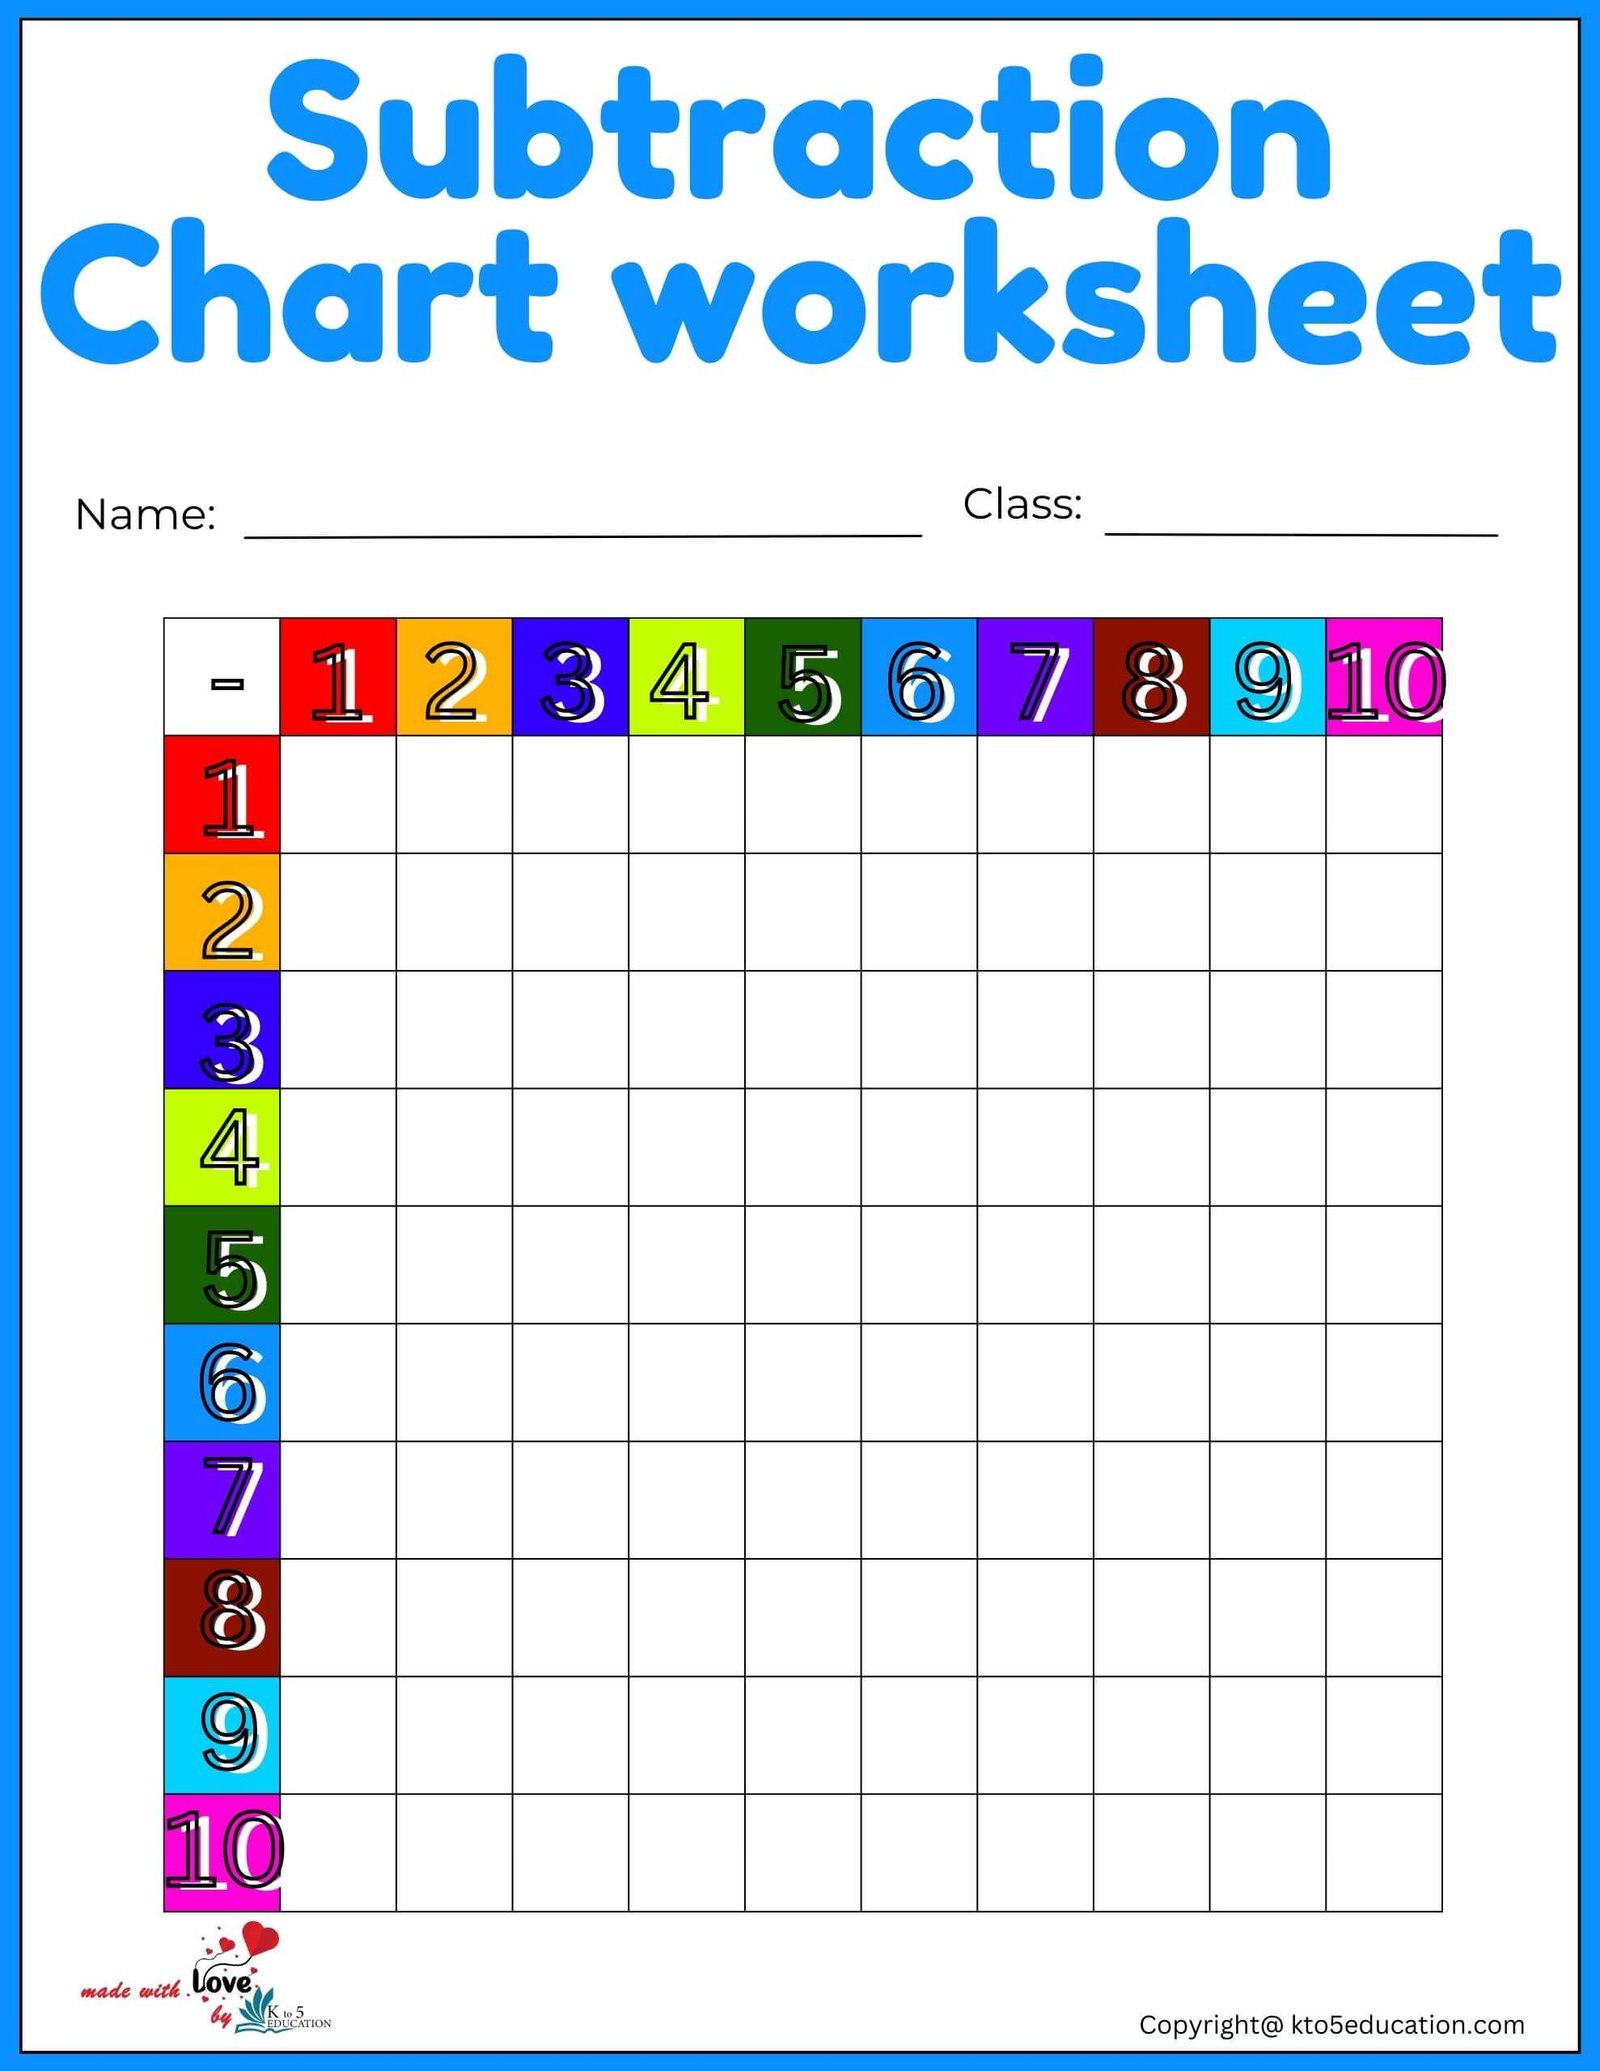 Free Subtraction Chart Worksheet